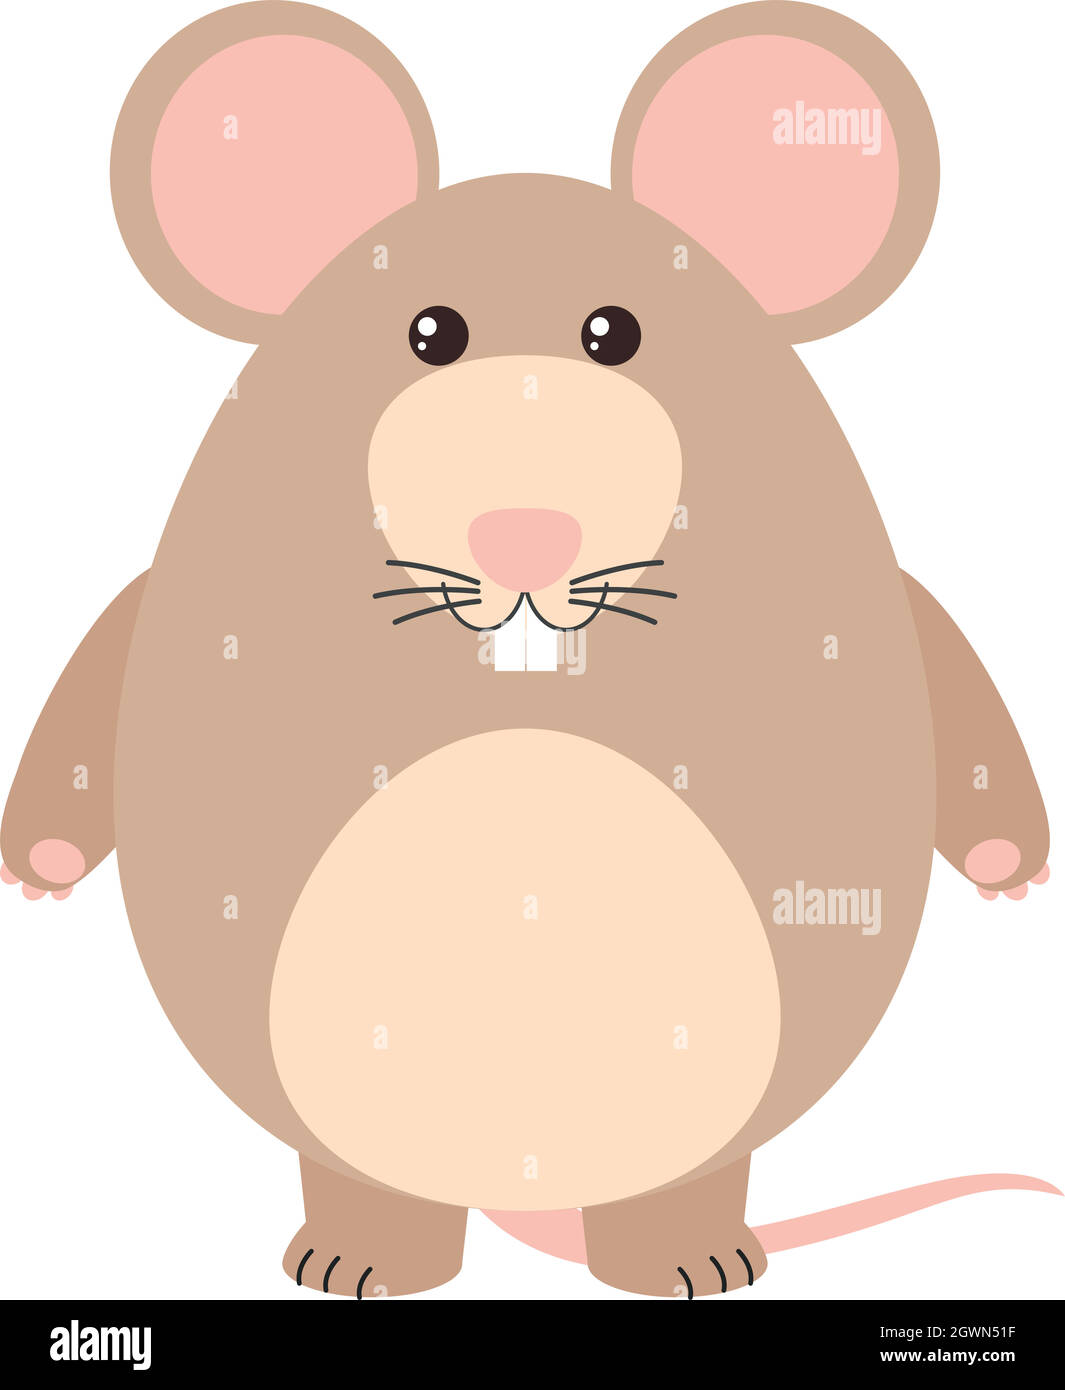 Cute rat with happy face Stock Vector